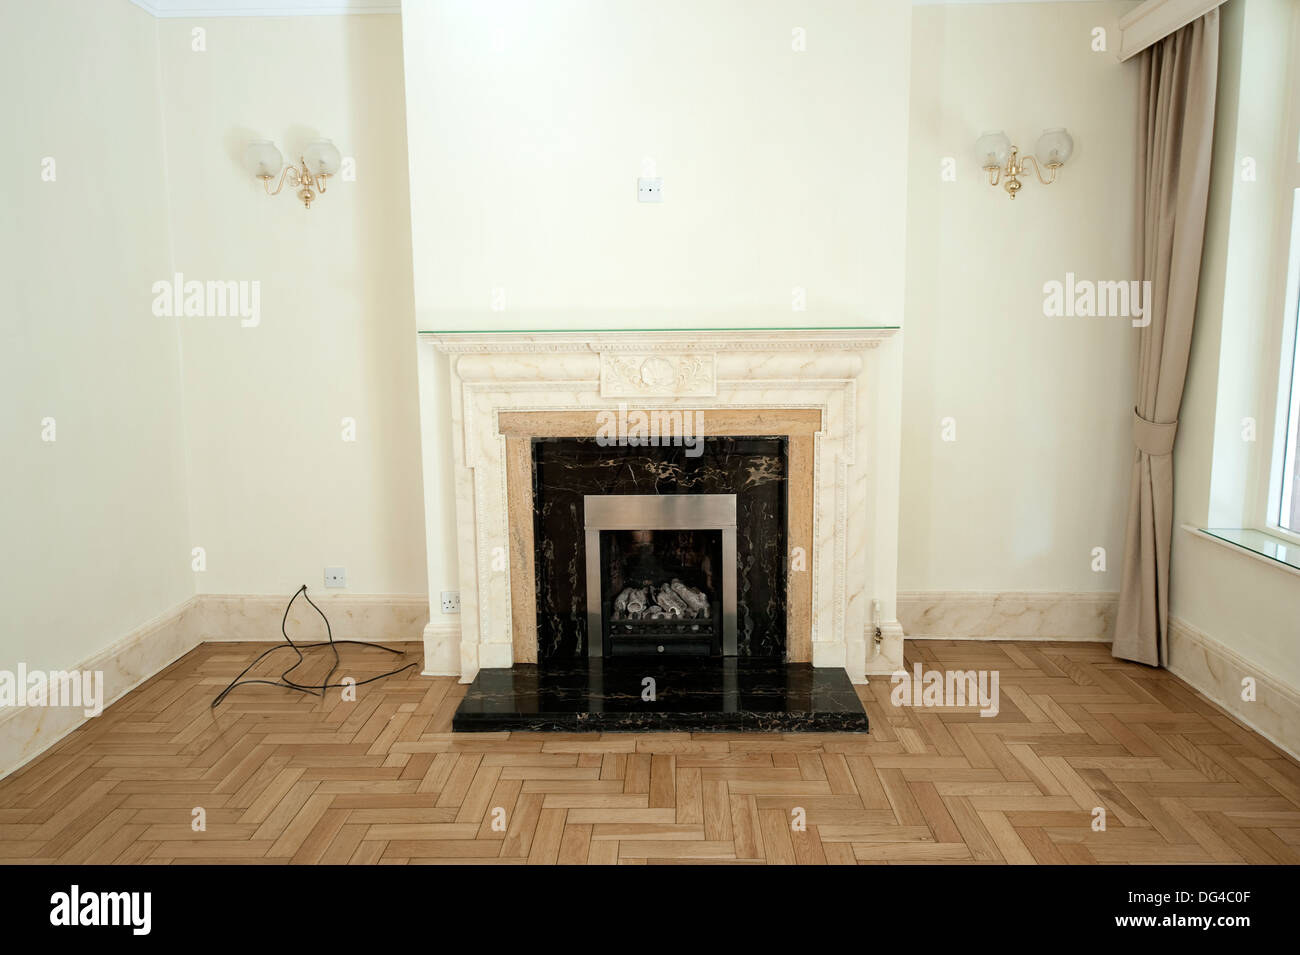 Fireplace in empty house moving out in buying selling Stock Photo